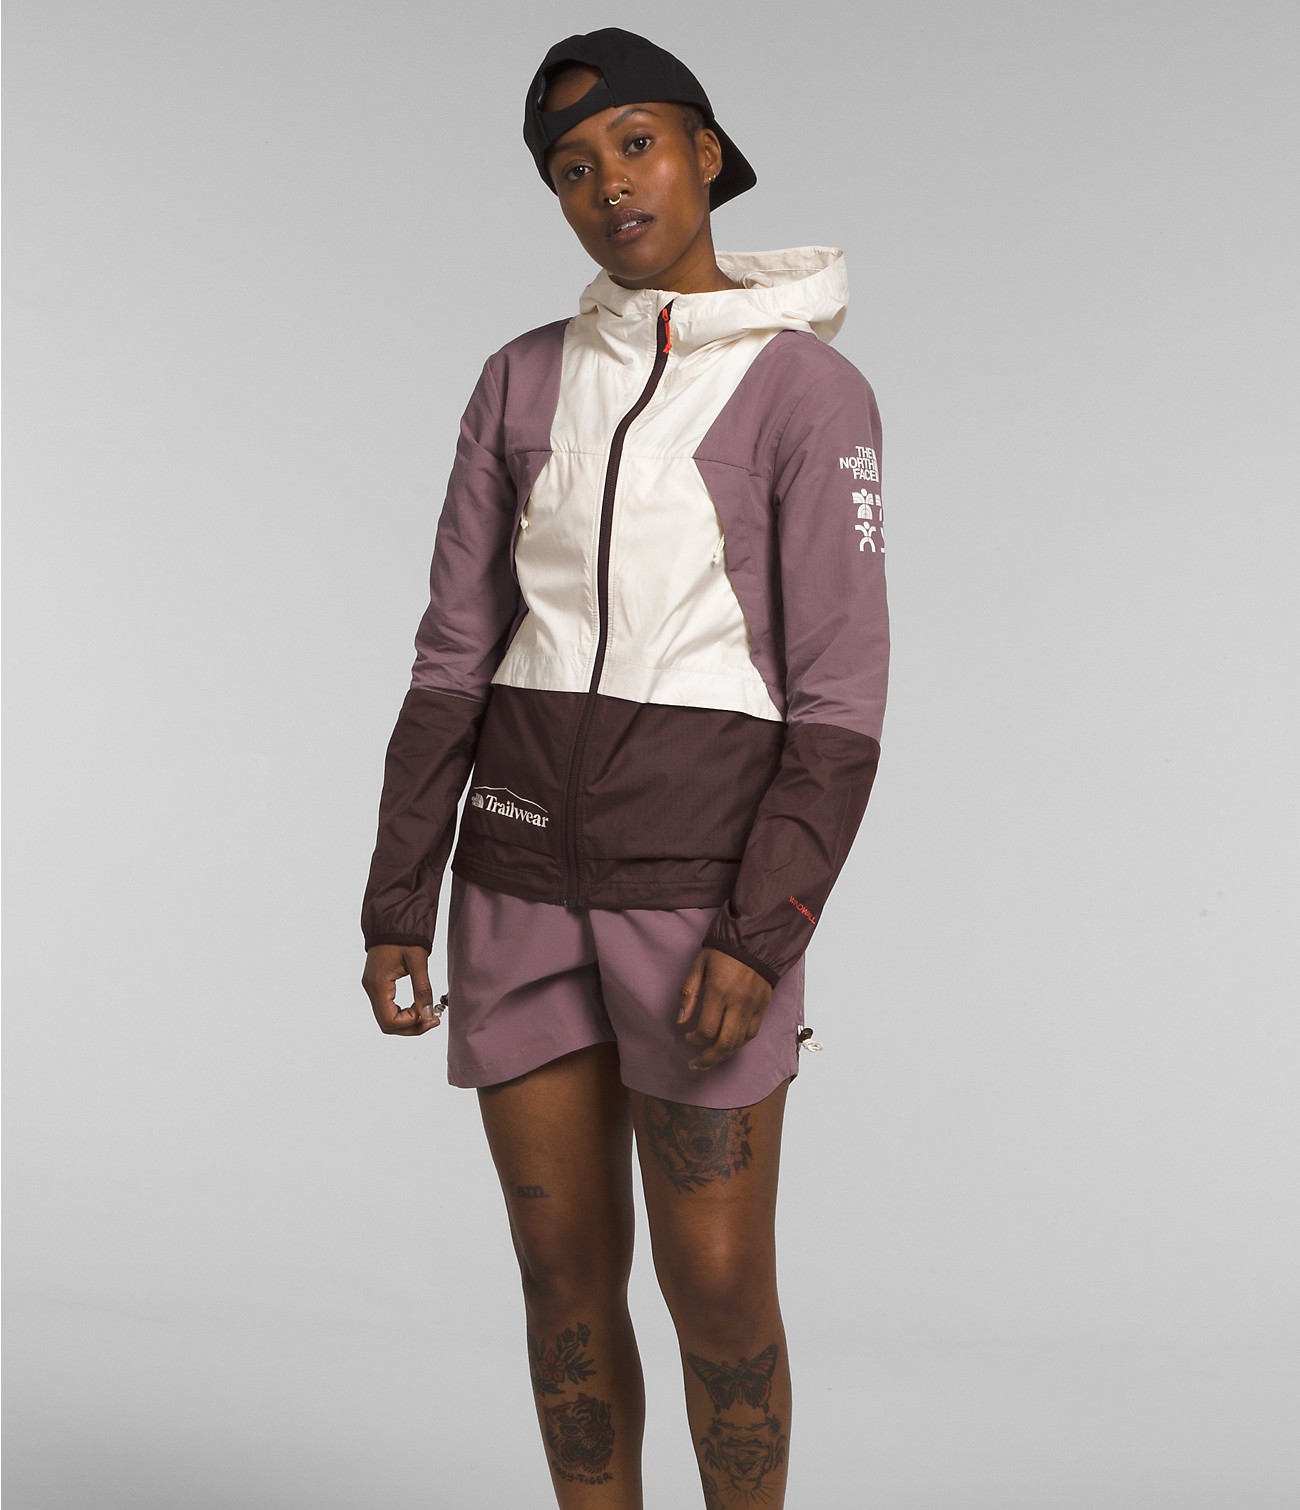 Unlock Wilderness' choice in the Lululemon Vs North Face comparison, the Trailwear Wind Whistle Jacket by The North Face